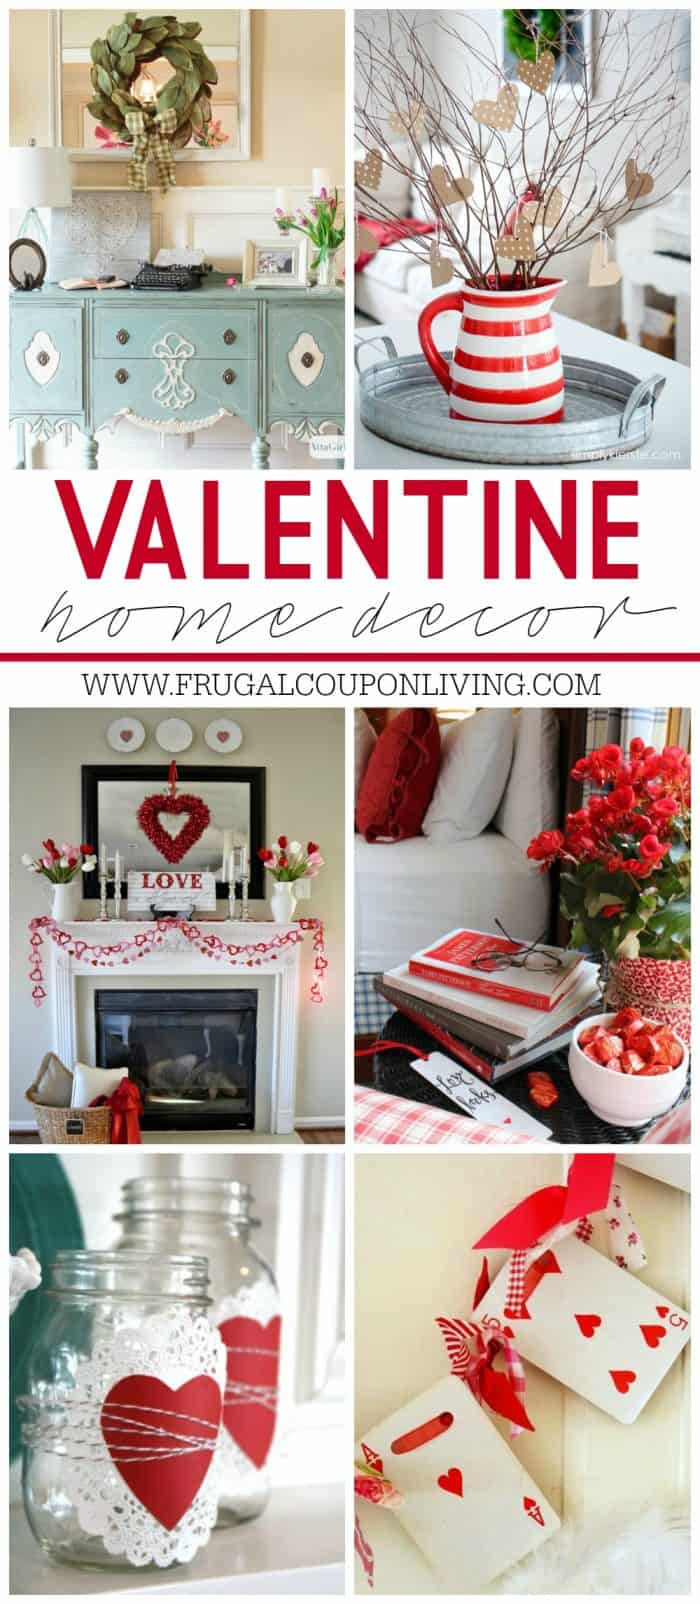 Pinterest Valentines Day Ideas
 Valentine s Day Archives Frugal Coupon Living